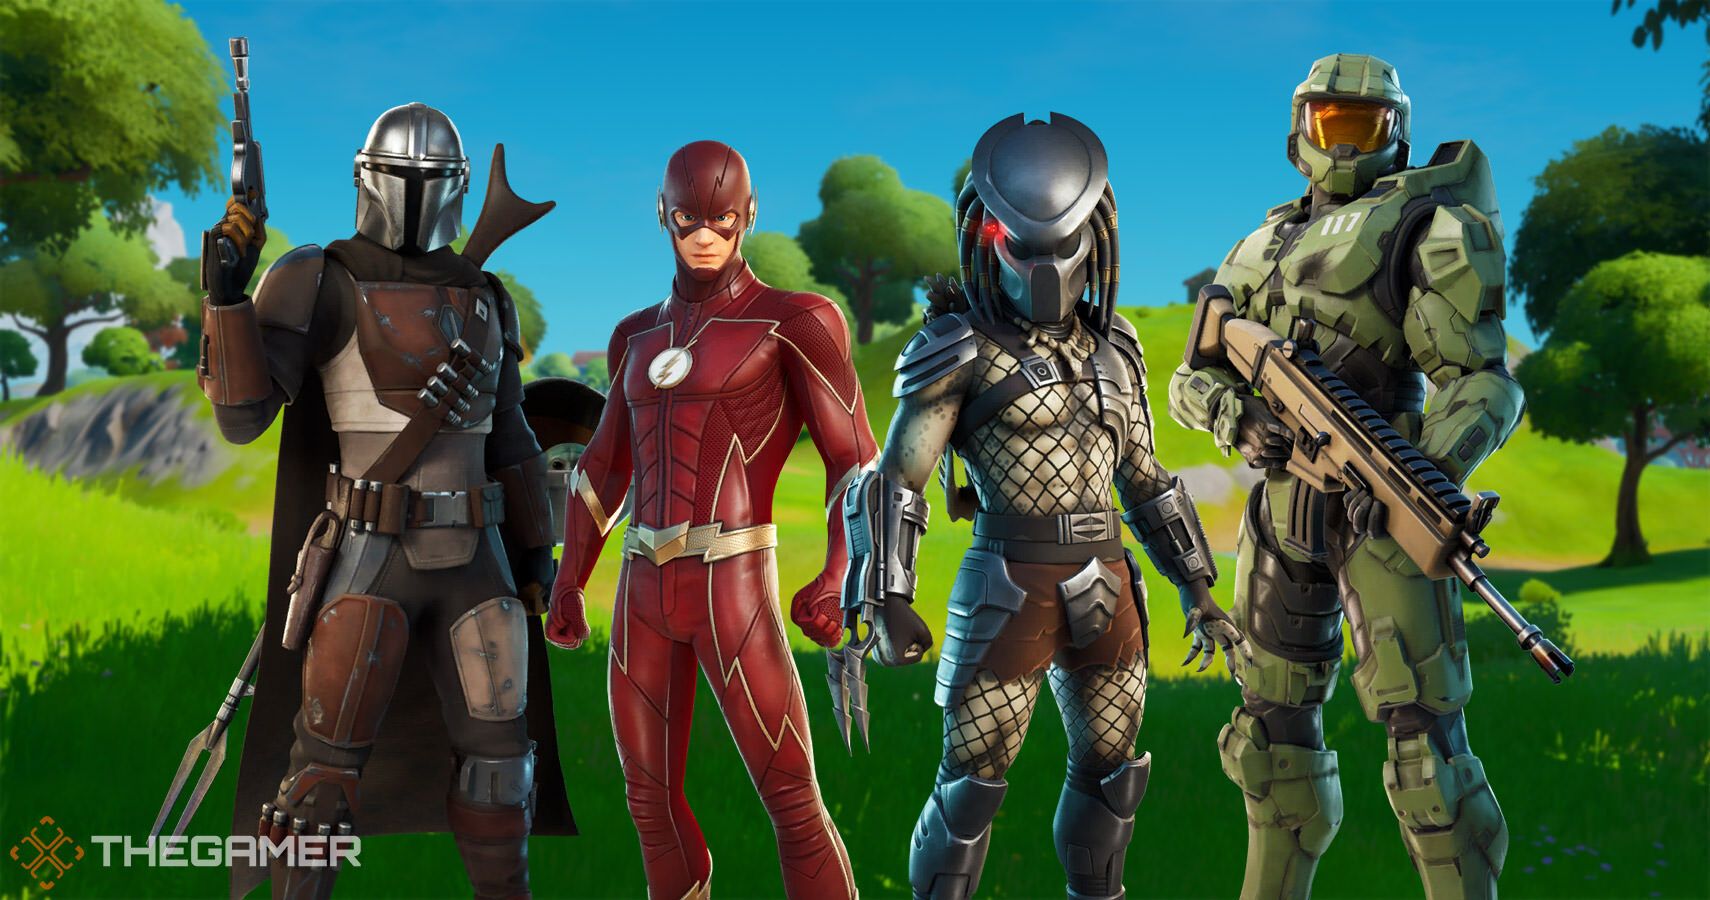 Fortnite’s Crossovers Have Become Meaningless